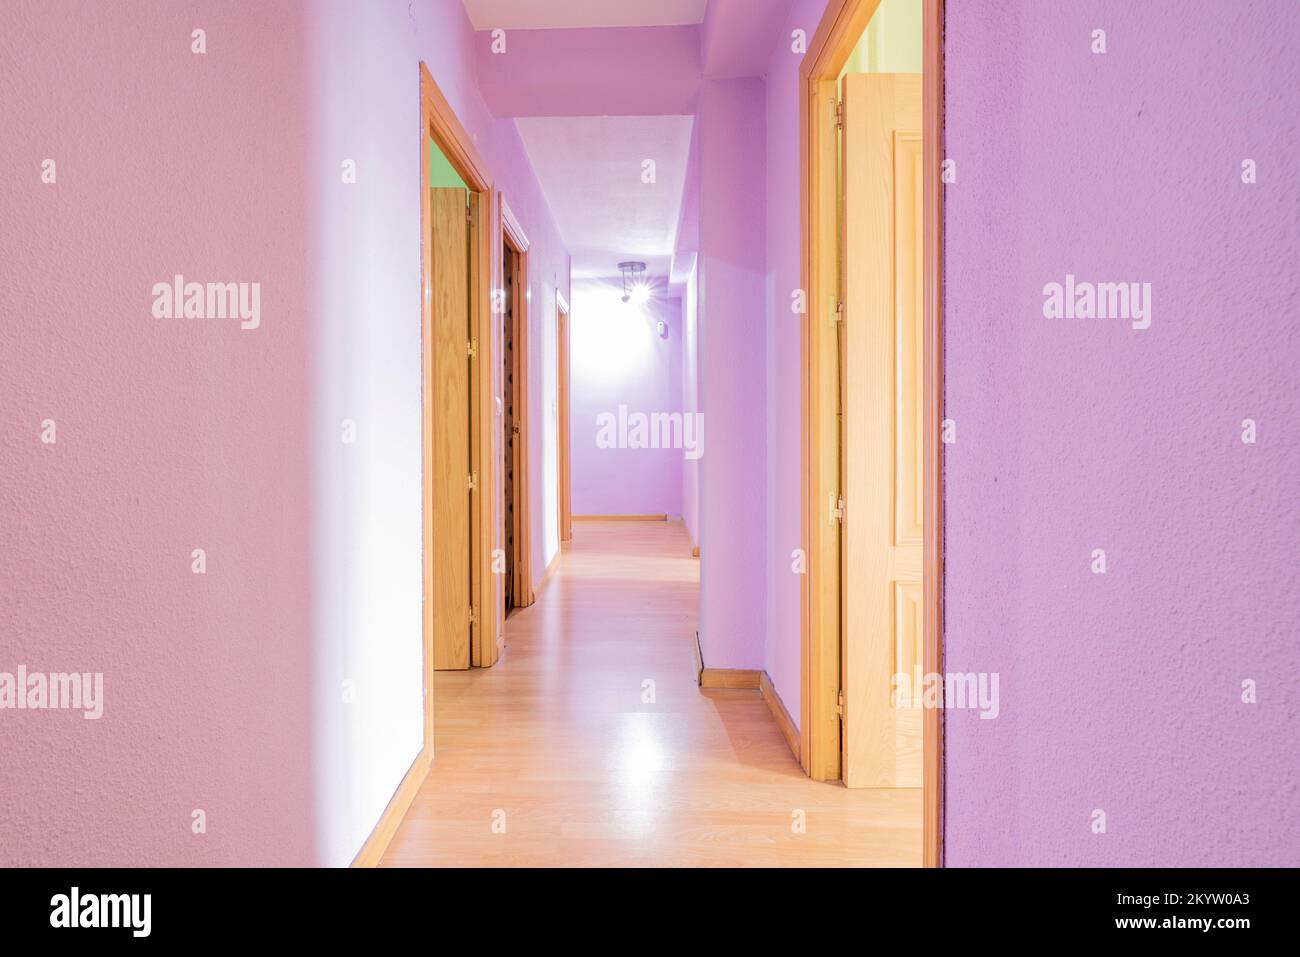 Corridor of a house with access doors to various rooms with laminated flooring, light oak door carpentry and fuchsia walls Stock Photo